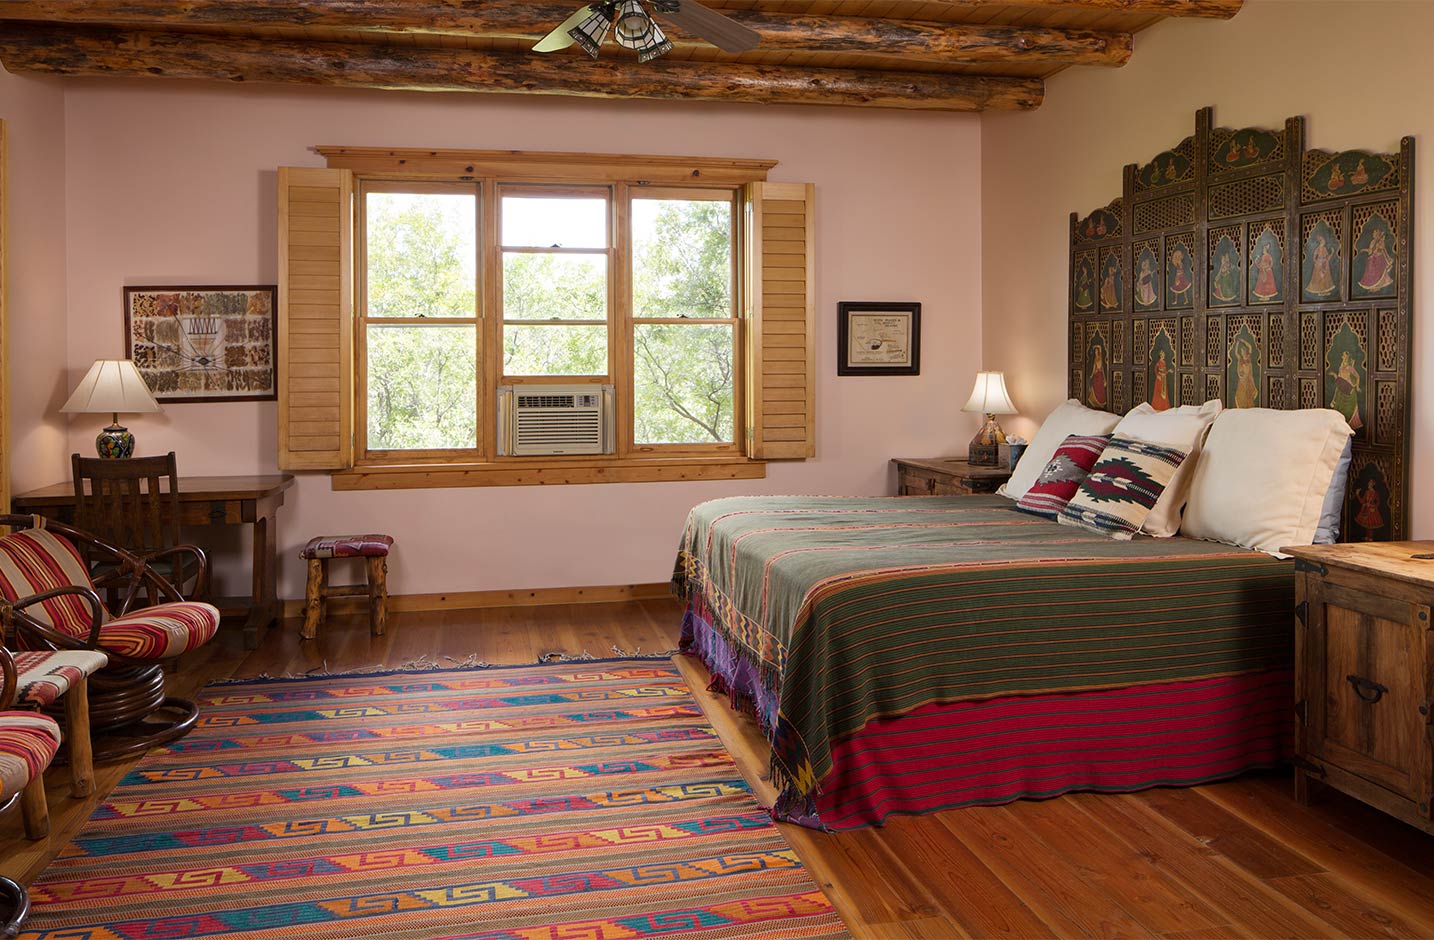 A spacious bedroom with hardwood floors and a king bed and seating area